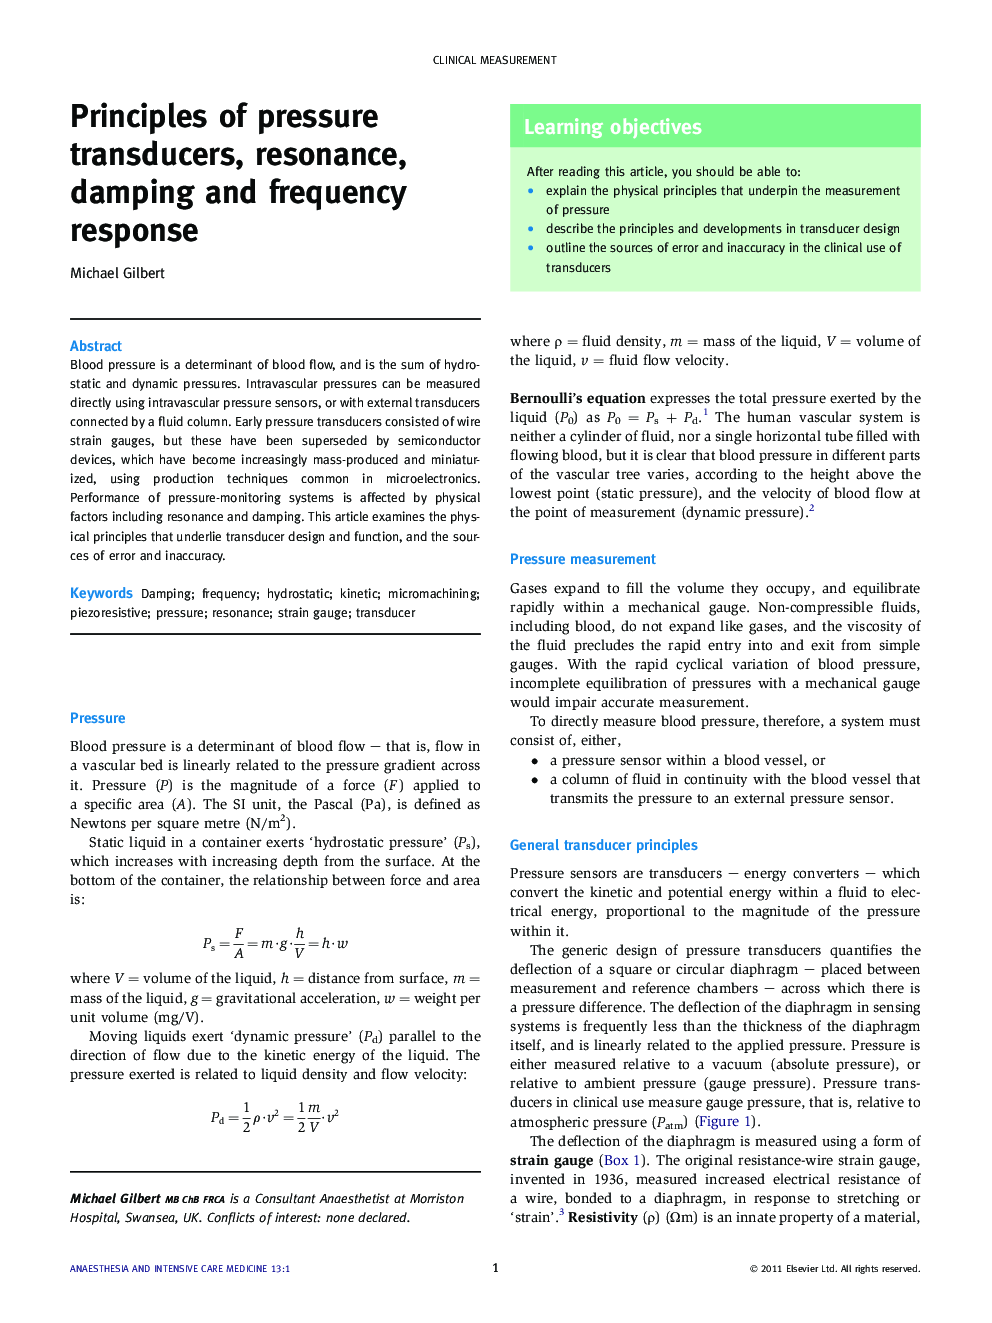 Principles of pressure transducers, resonance, damping and frequency response